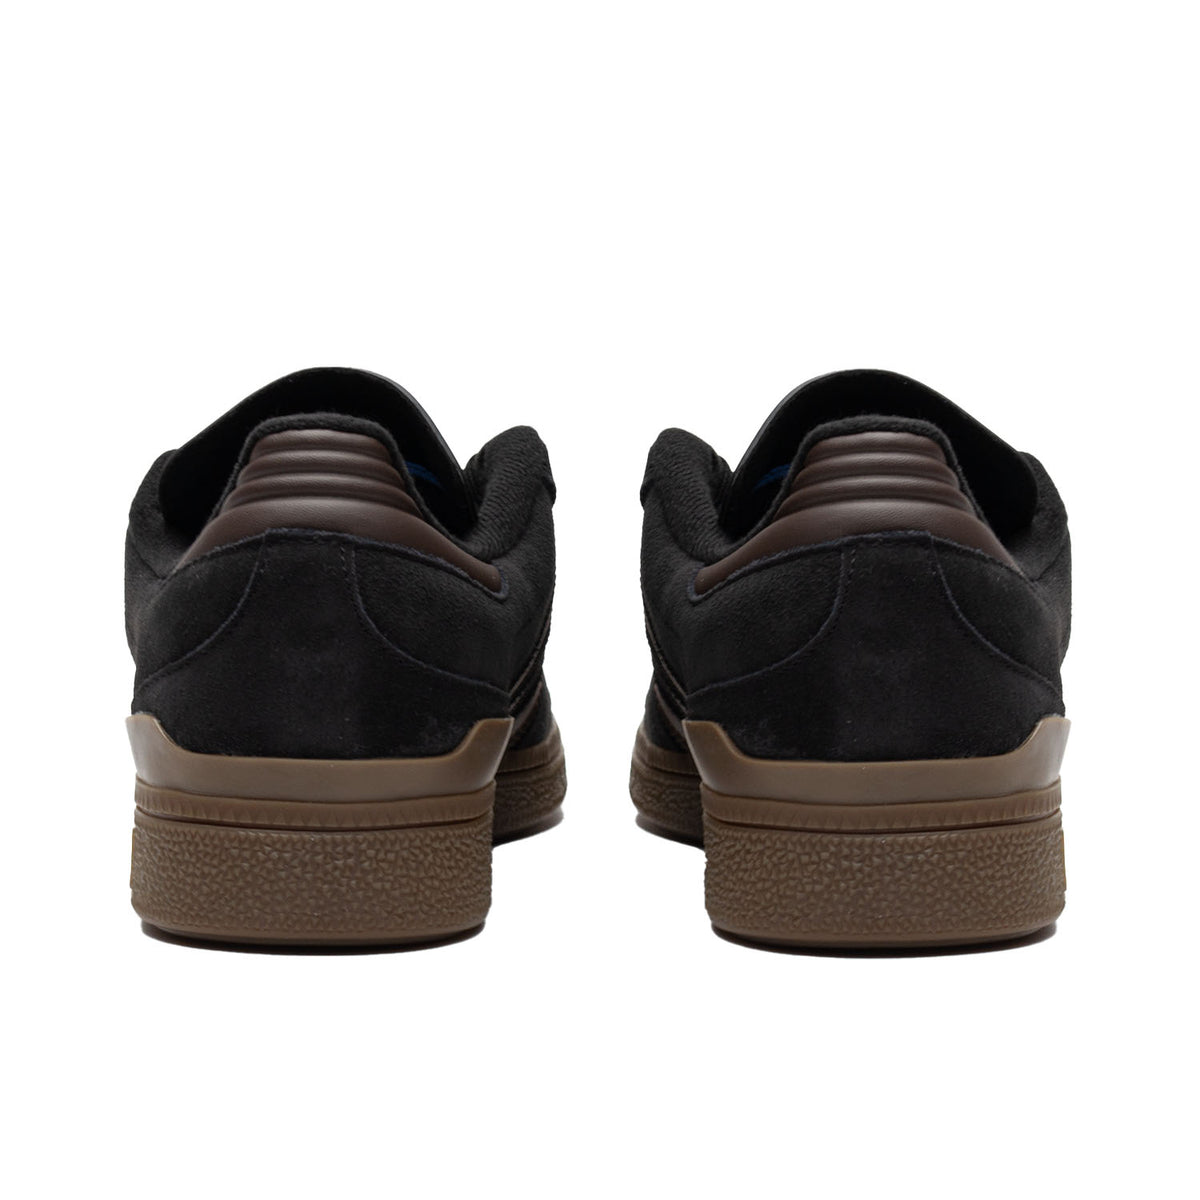  The adidas Action Sports and Dennis Busenitz partnership transforms the Copa Mundial football boot into reliable skate shoes, featuring a sturdy upper, cupsole construction, Geofit collar, brown gum sole, brown adidas stripes and heel detail, and black suede, ideal for Dennis&#39; versatile skateboarding style.